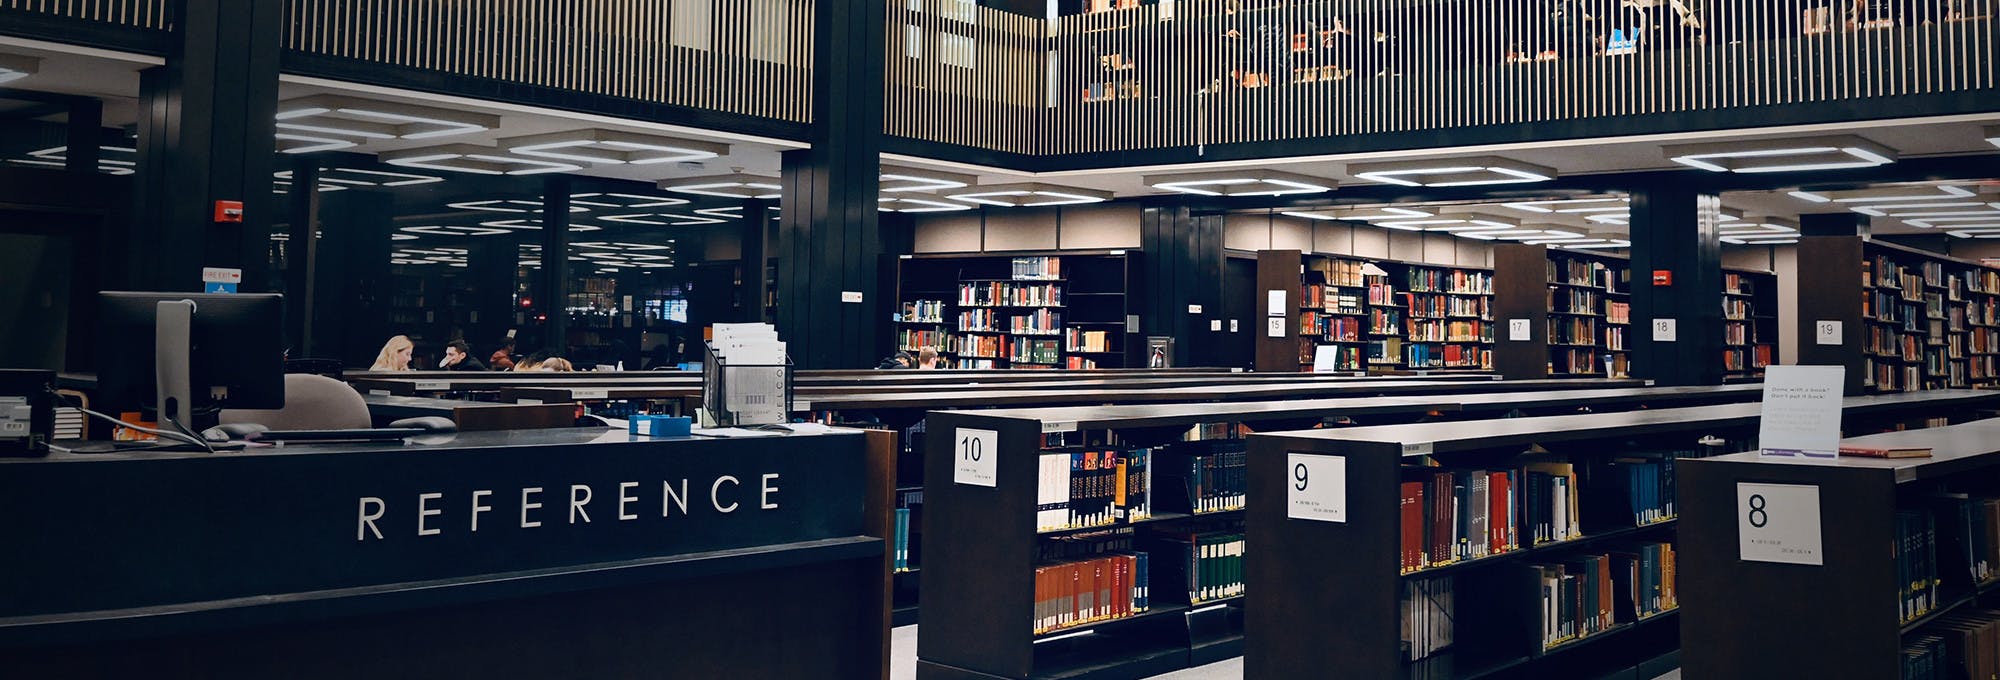 Library where you can research How To Get A Job while in College 